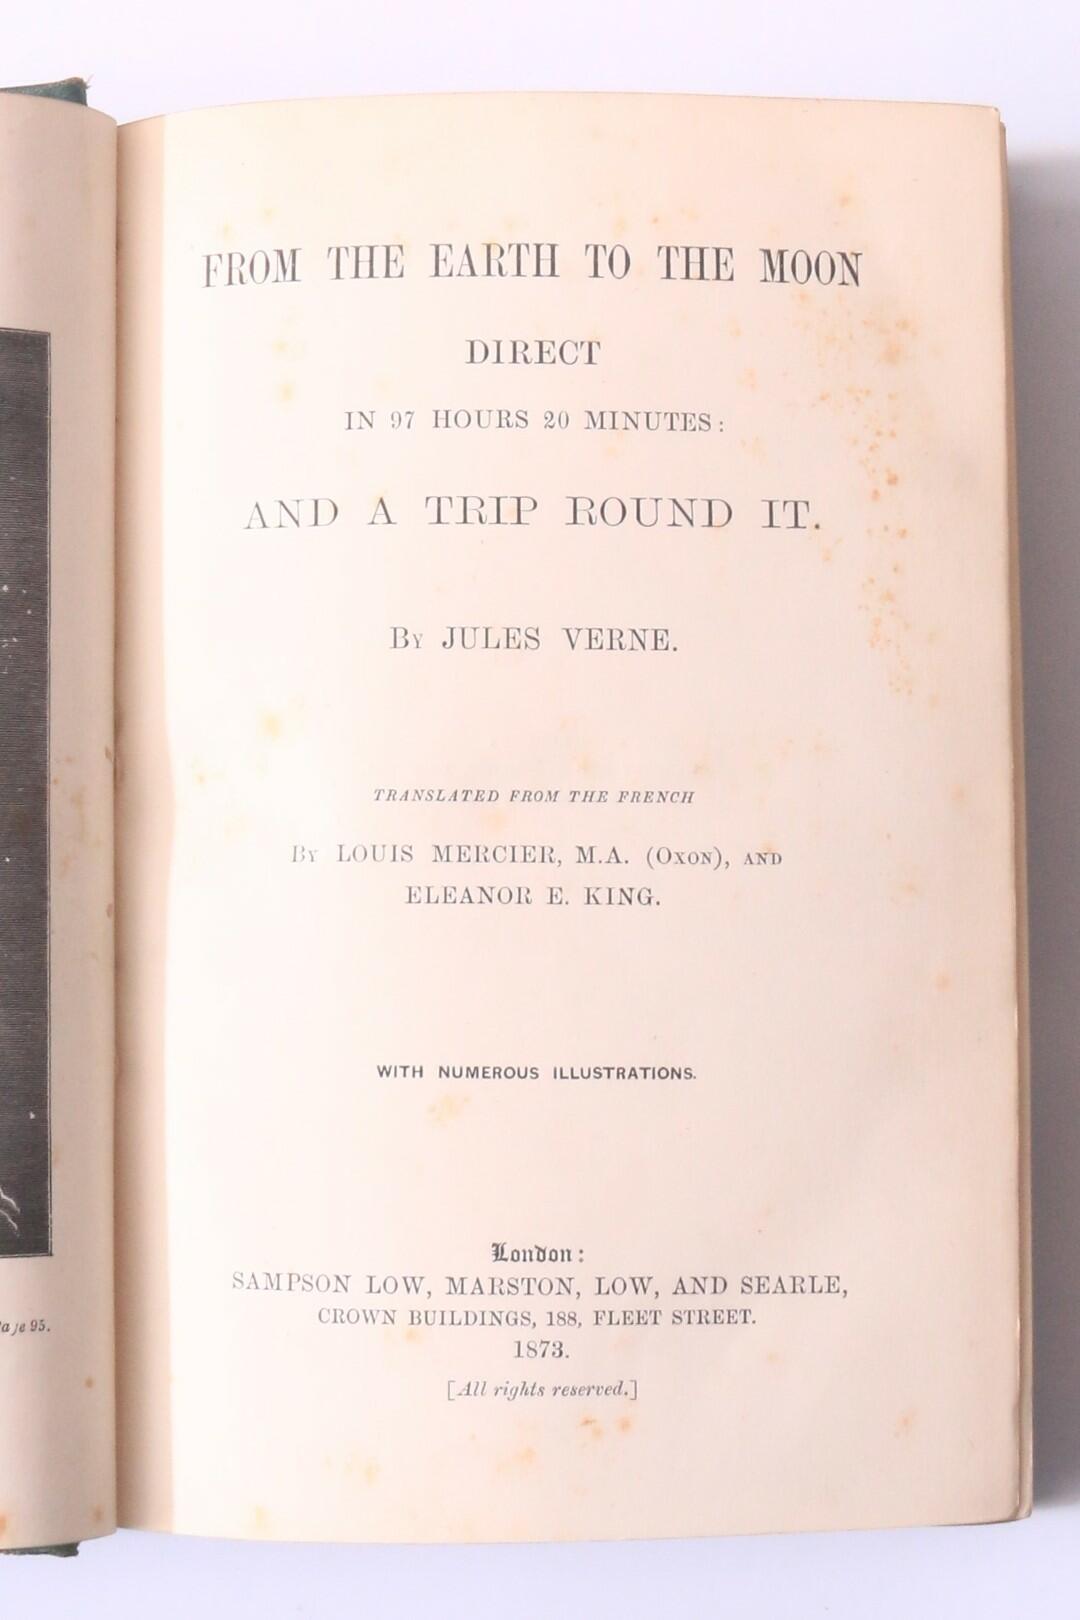 Jules Verne - From the Earth to the Moon Direct In 97 Hours and 20 Minutes: And a Trip Round it - Sampson Low, Marston, Low, and Searle, 1873, First Edition.